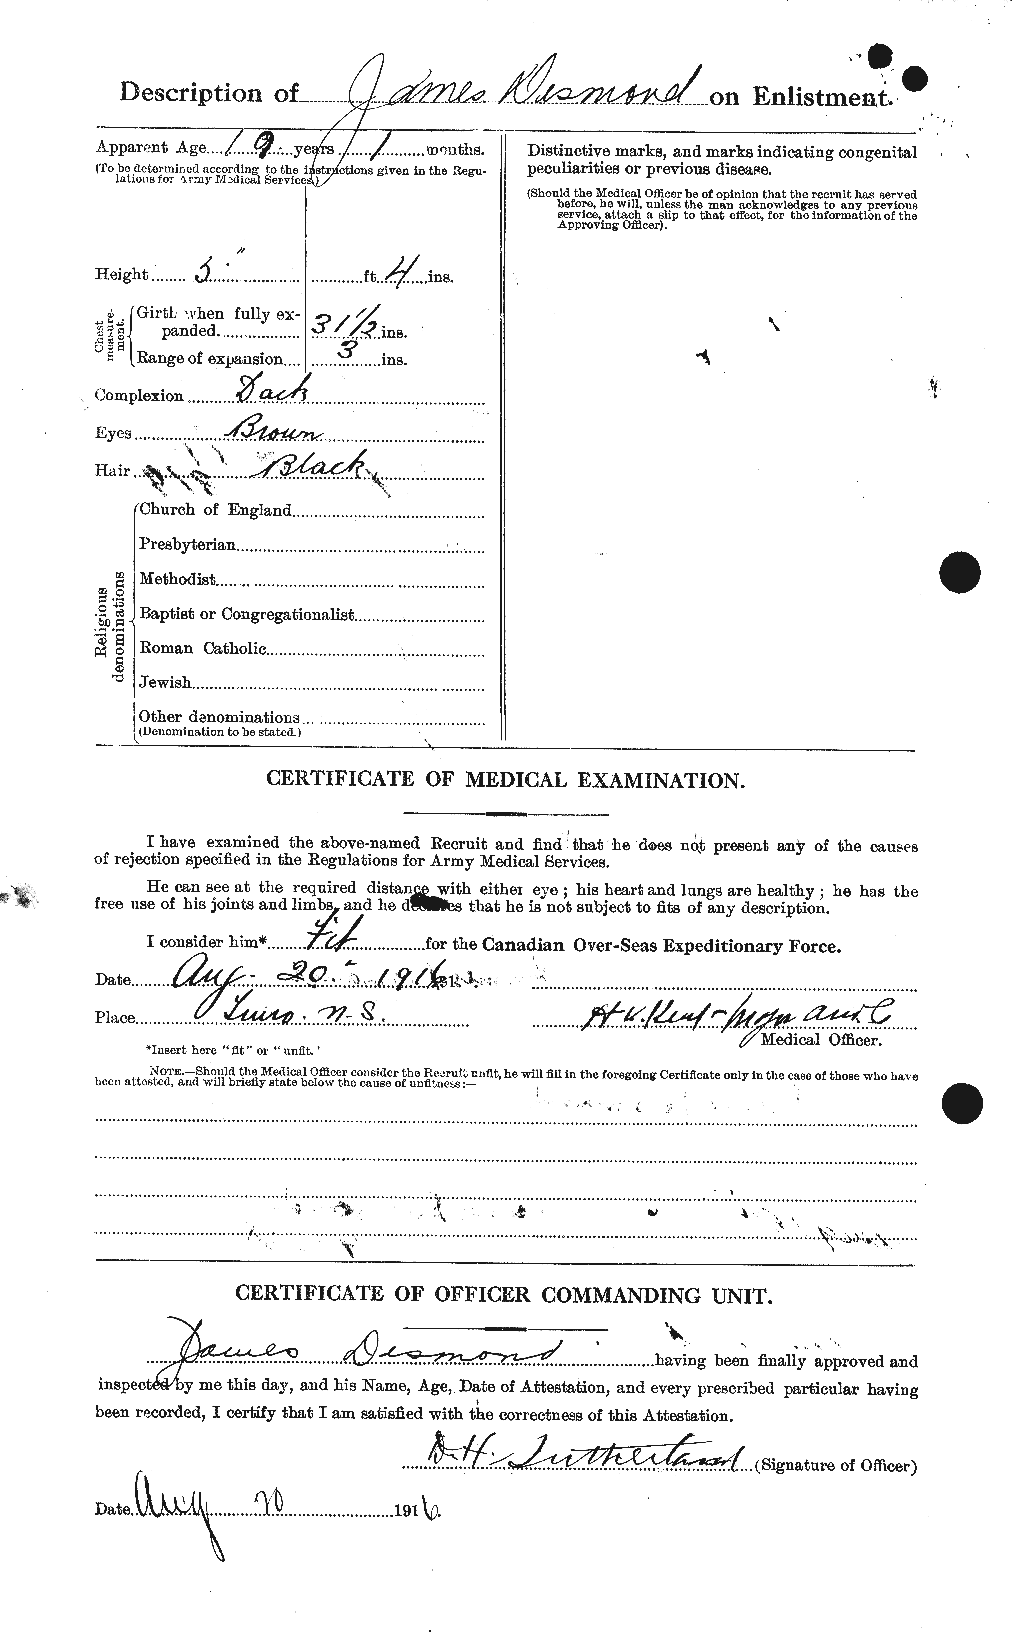 Personnel Records of the First World War - CEF 291347b